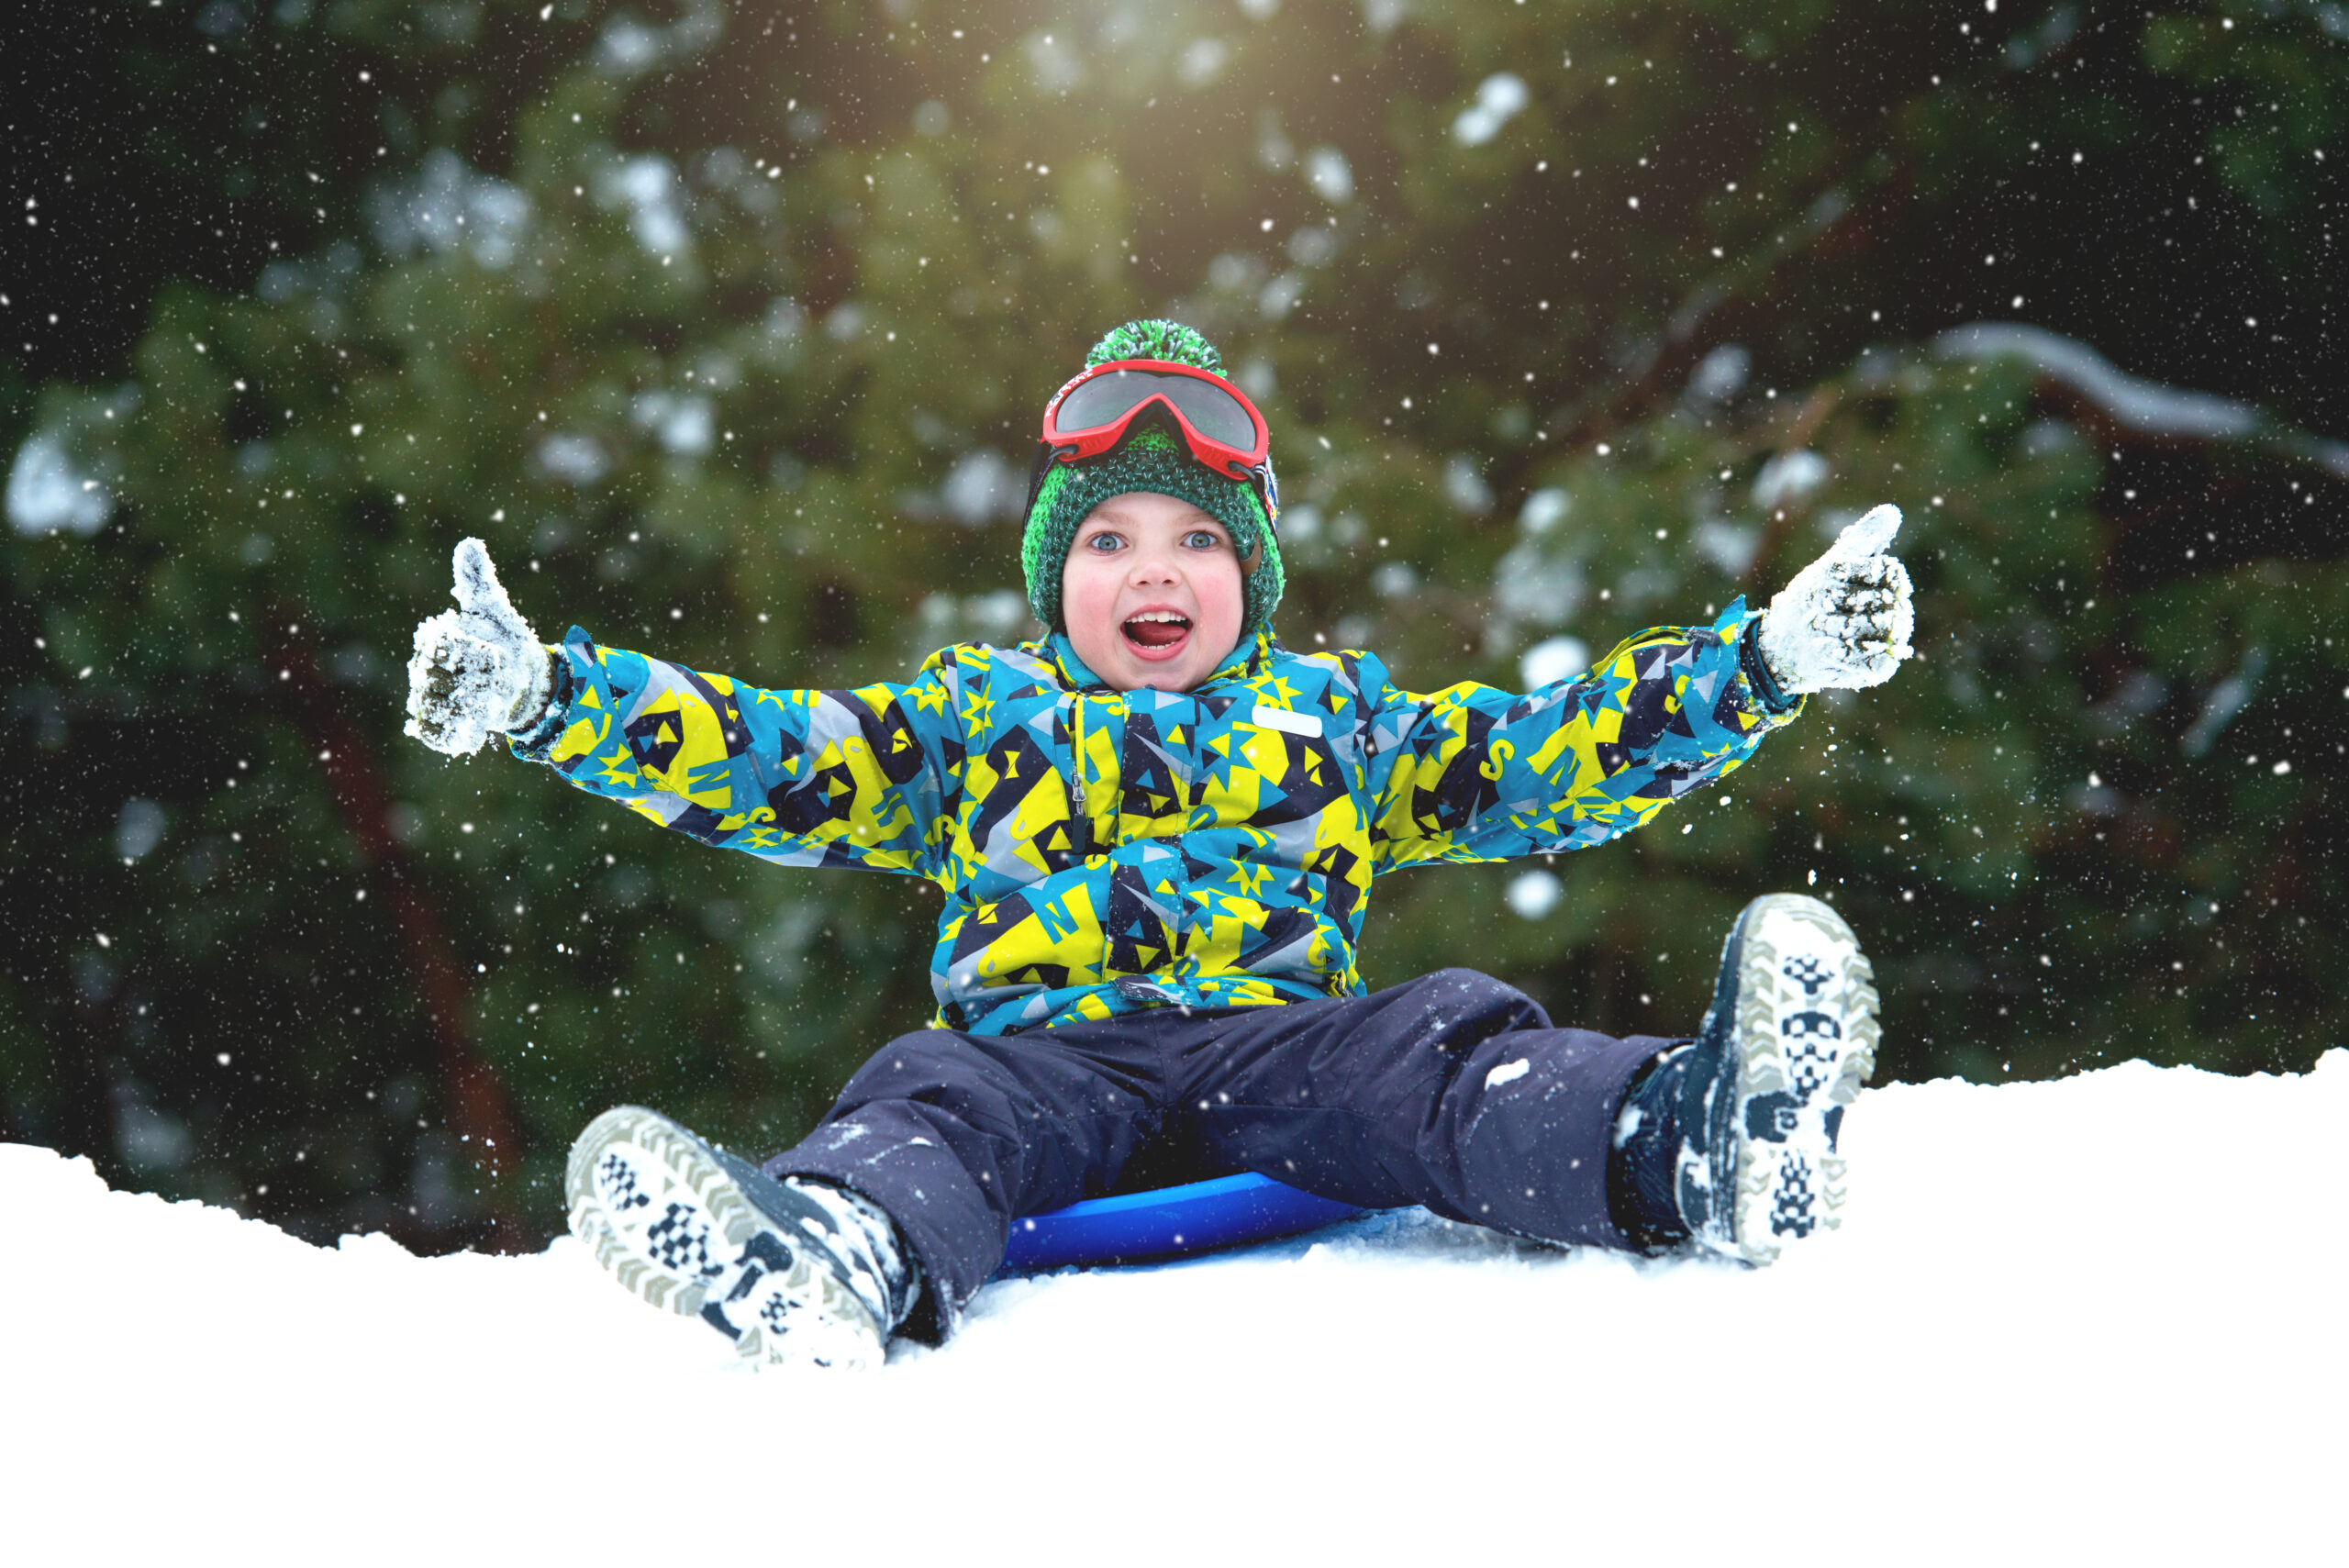 Towns Are Banning Sledding Because Parents Sue When Kids Get Hurt